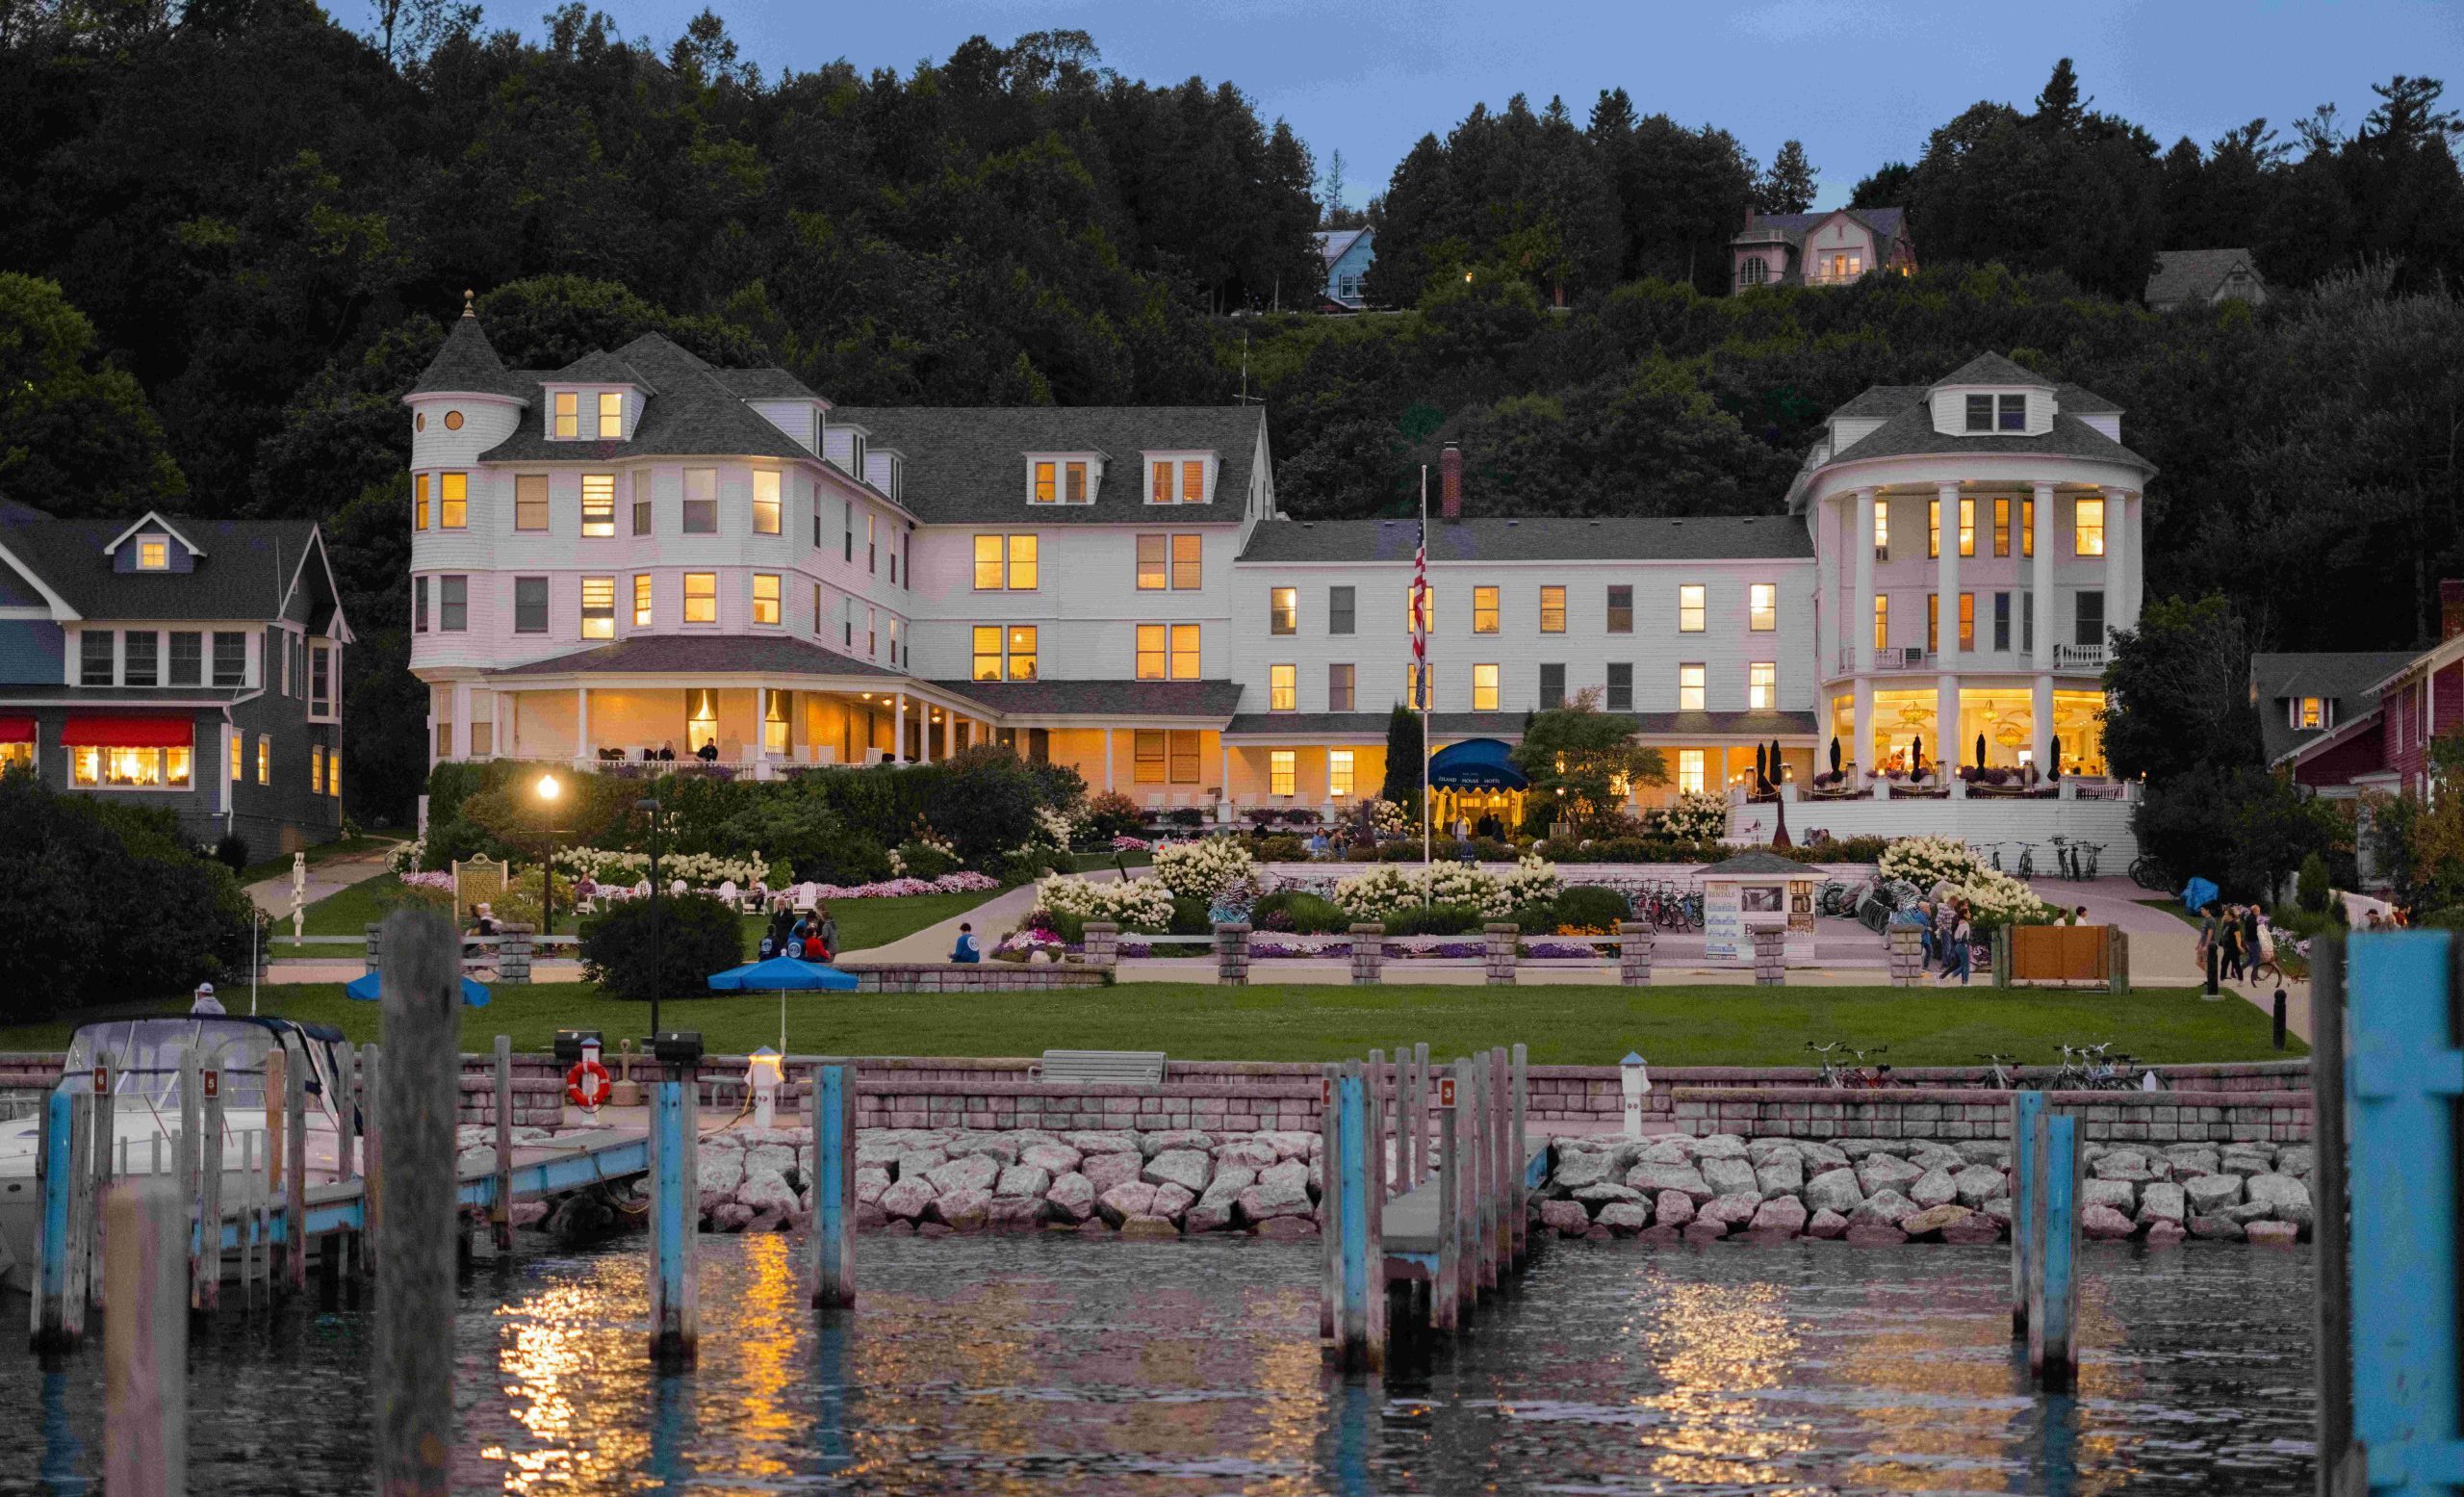 The lights of Island House Hotel reflect on the water in the Mackinac Island marina at twilight